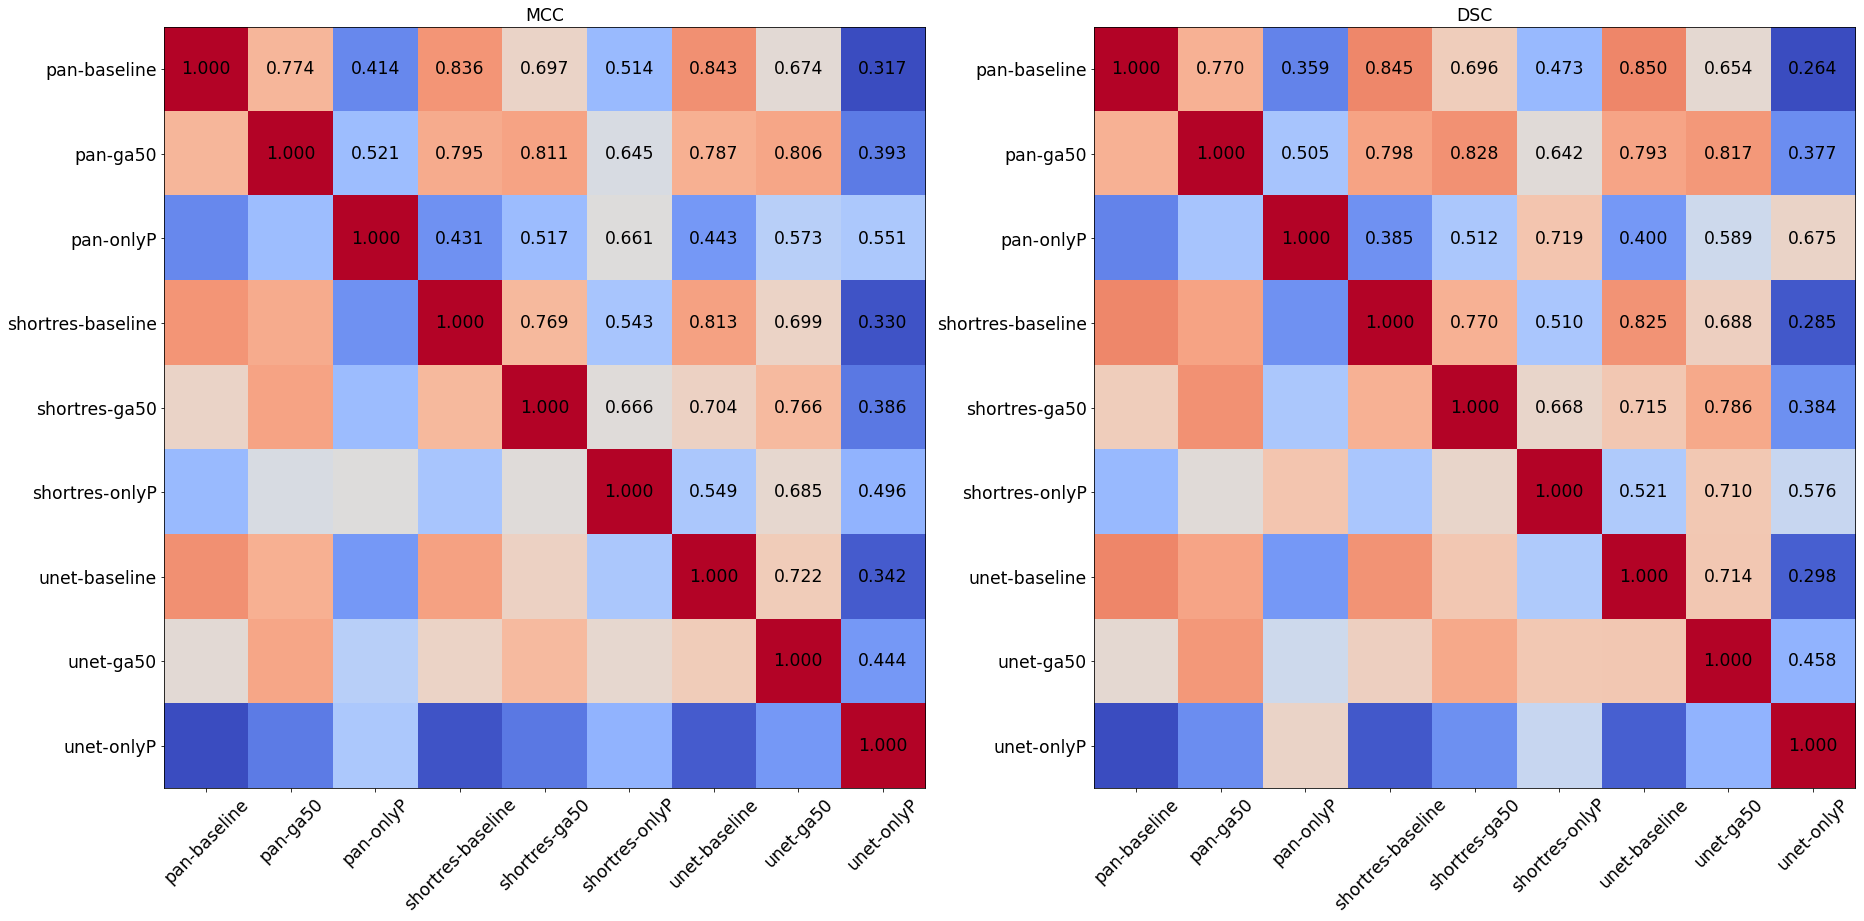 Figure 6.6. Similarity matrix of the different algorithms, using the per-pixel MCC (left) and the DSC (right) as metrics. Blue indicates low similarity, red high similarity.